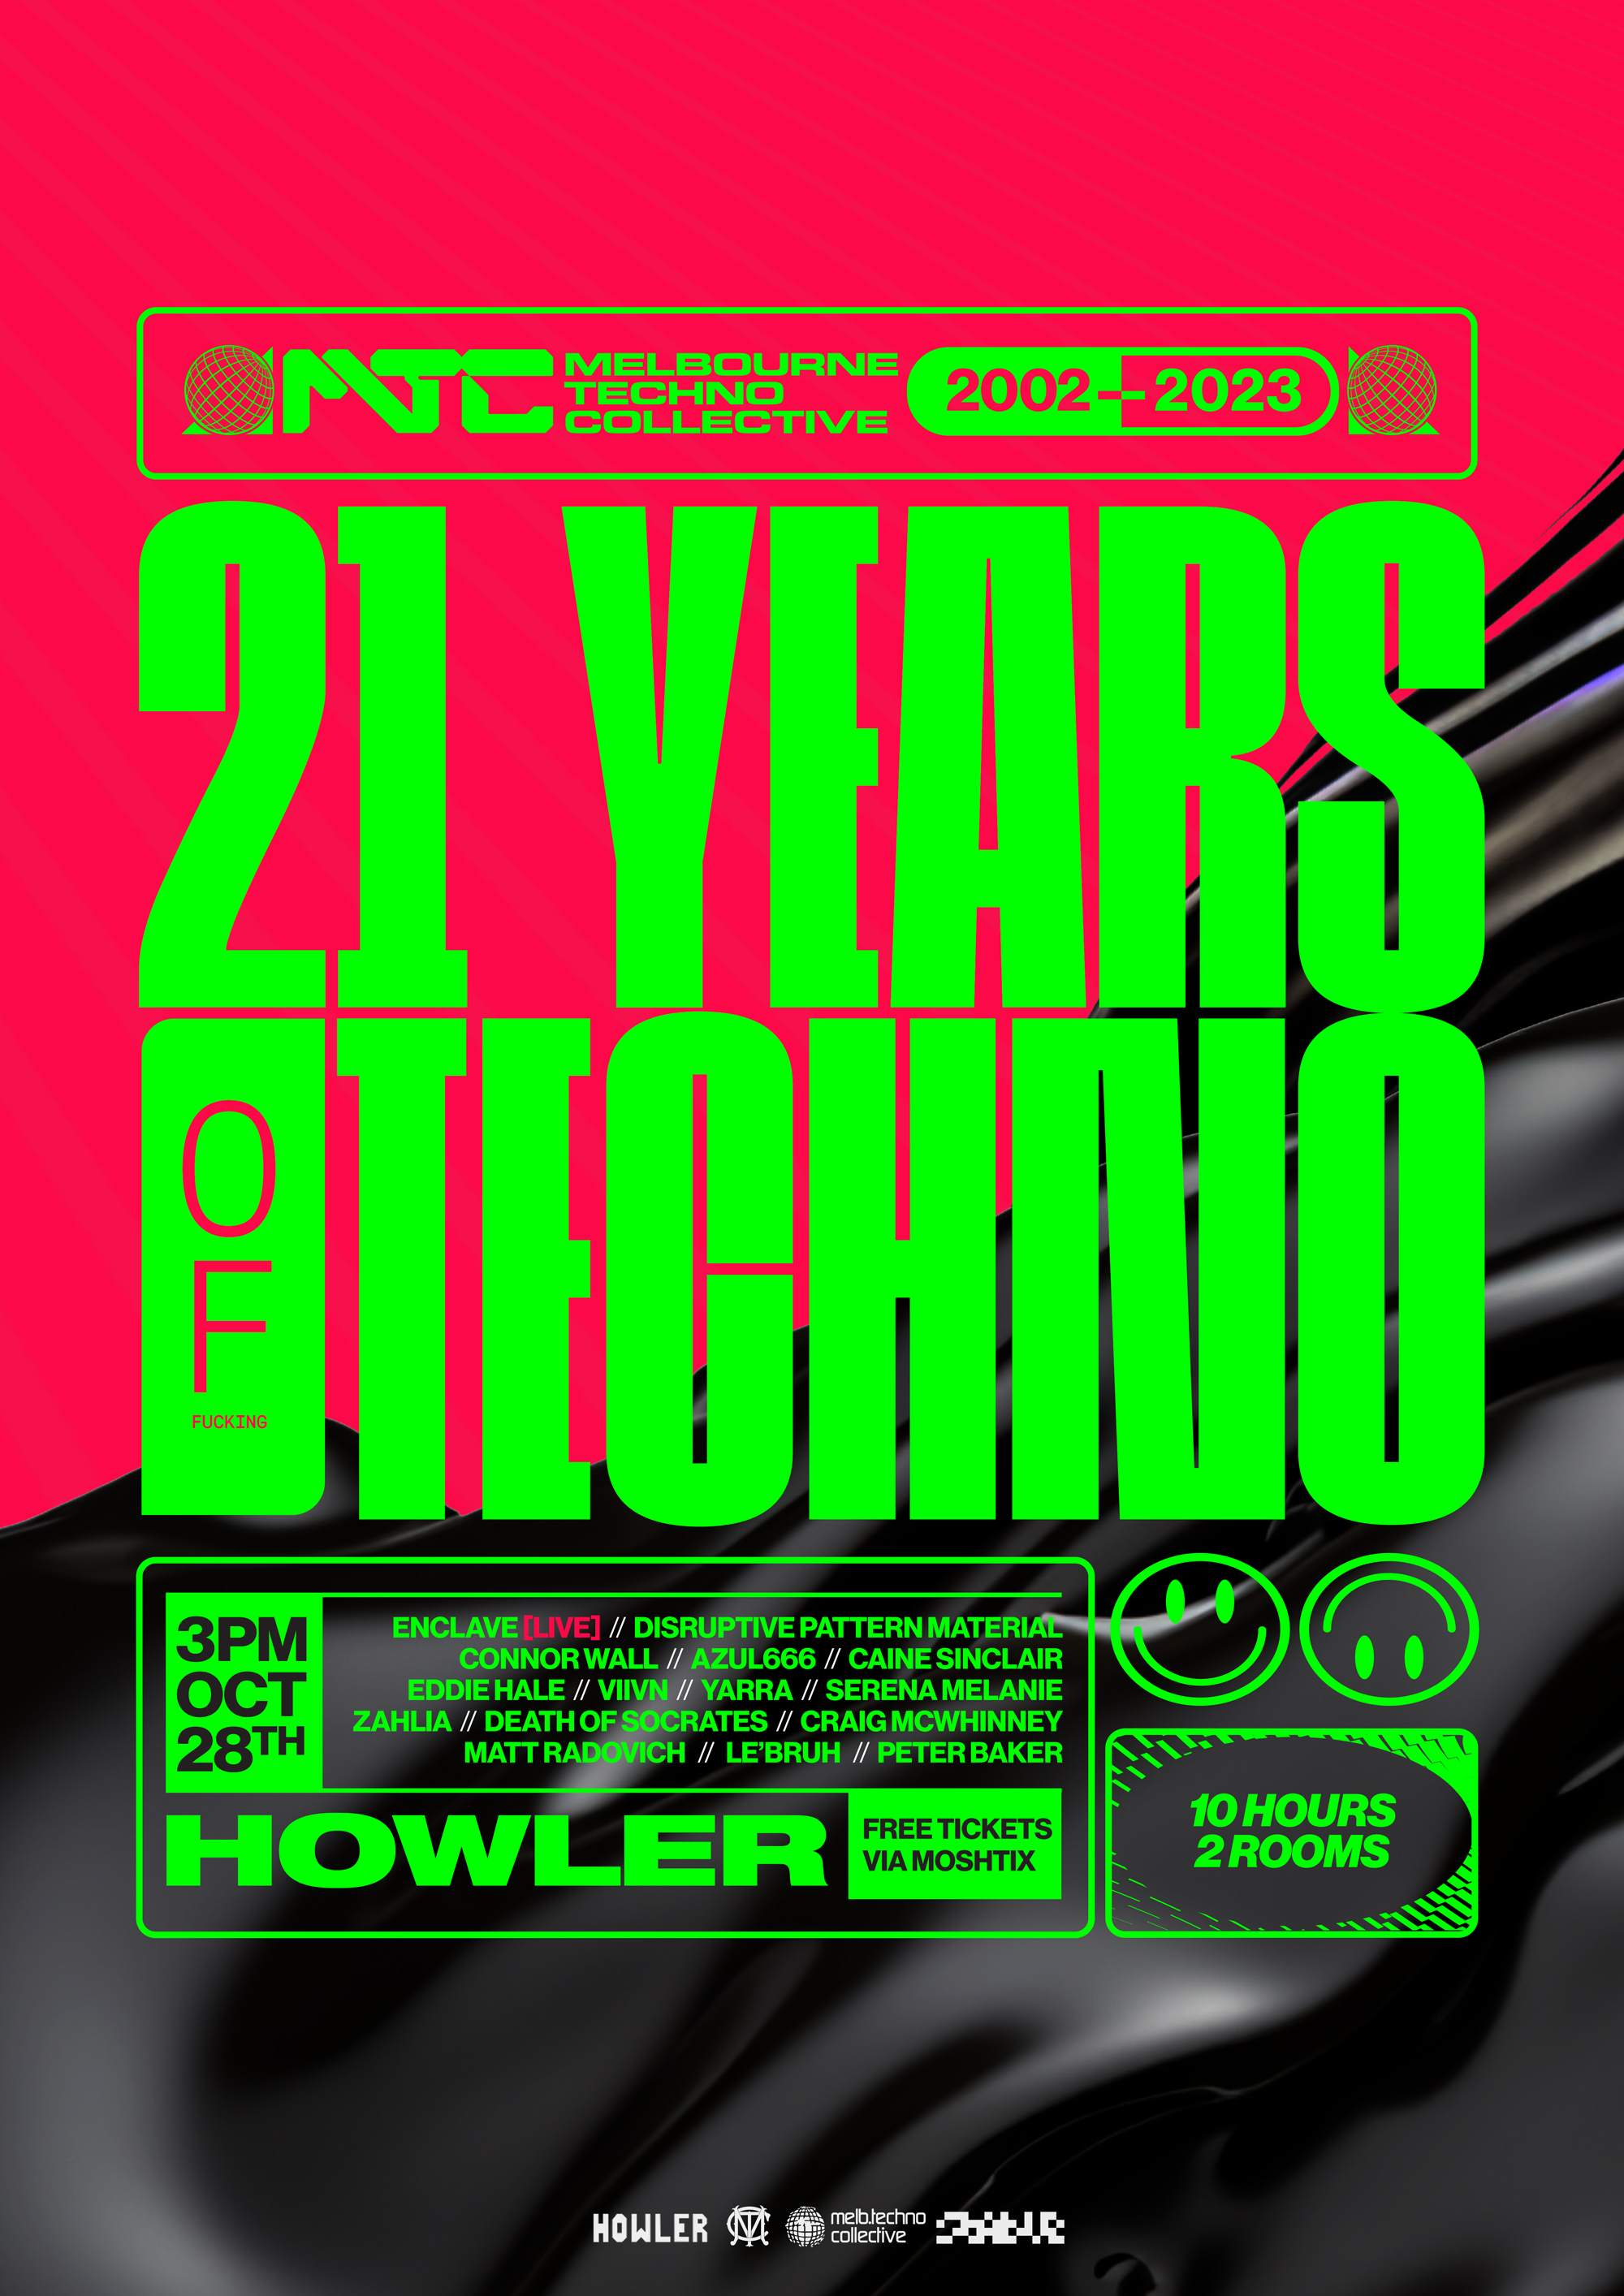 Melbourne TECHNO Collective's 21st Birthday Party - FREE Event - Página frontal